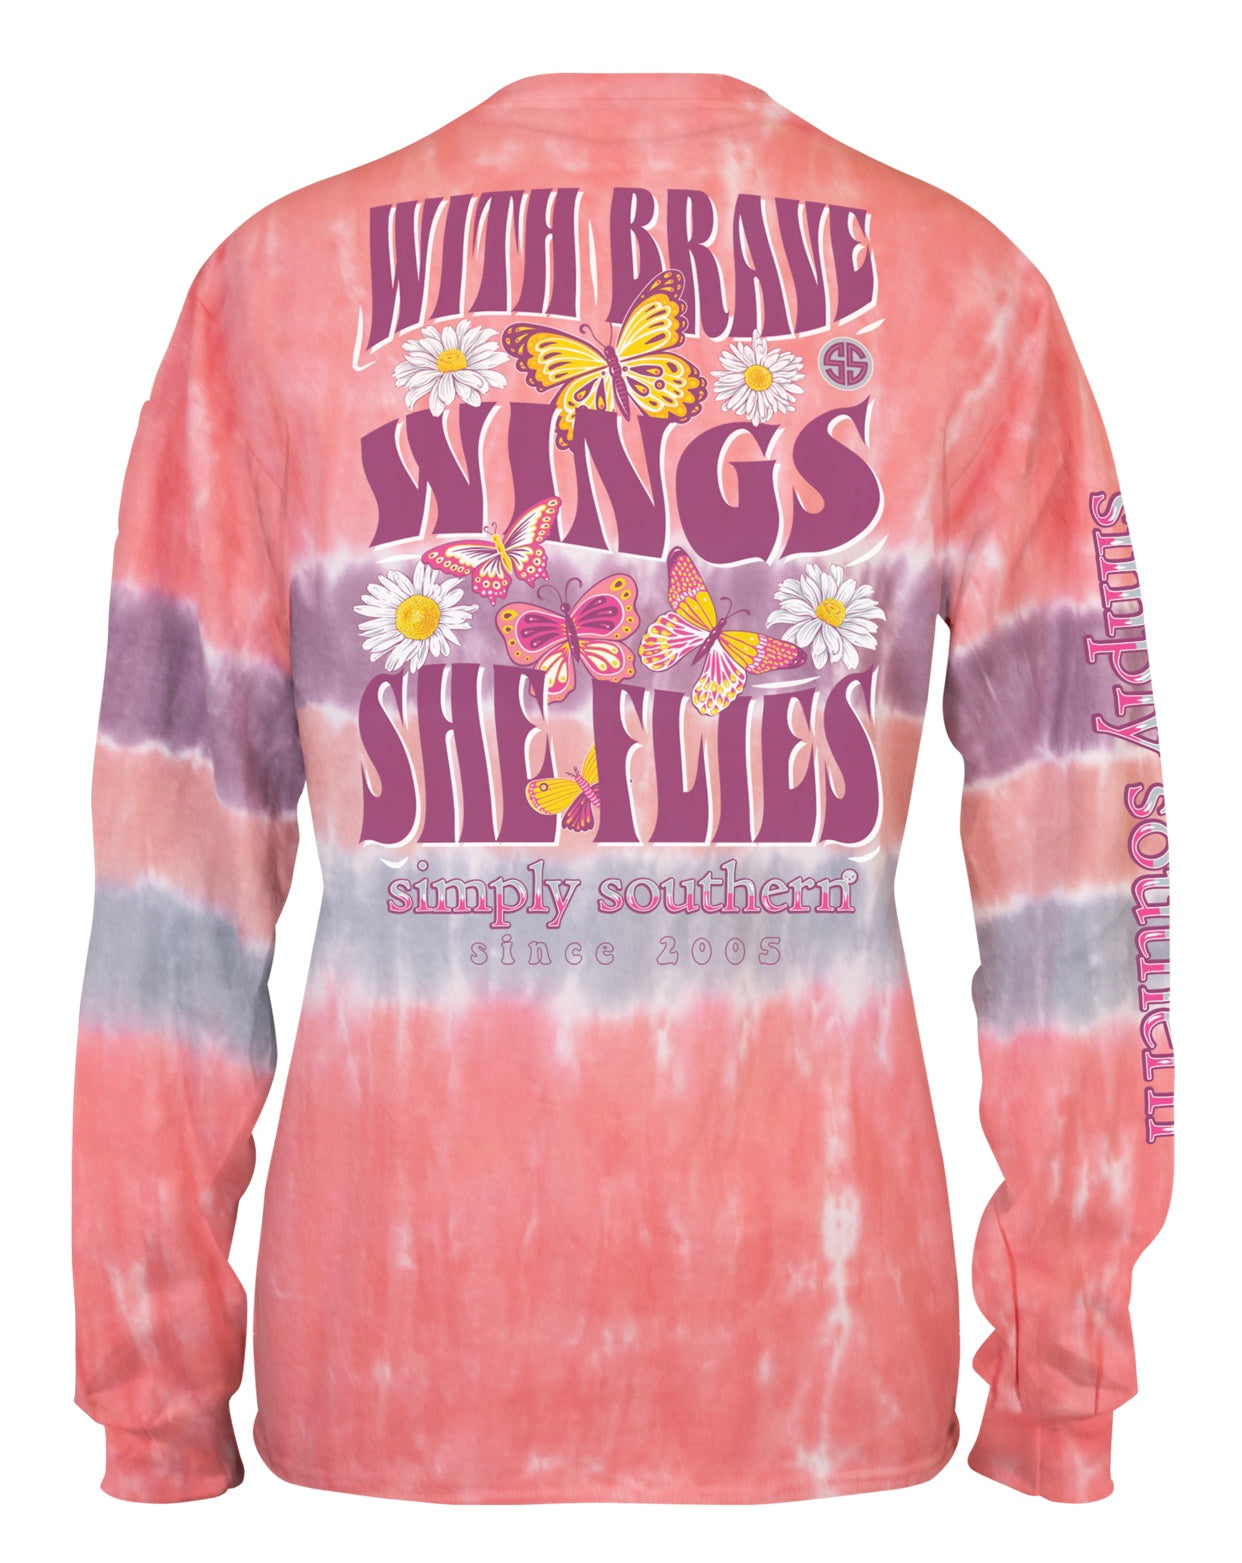 WITH BRAVE WINGS SHE FLIES LONG SLEEVE